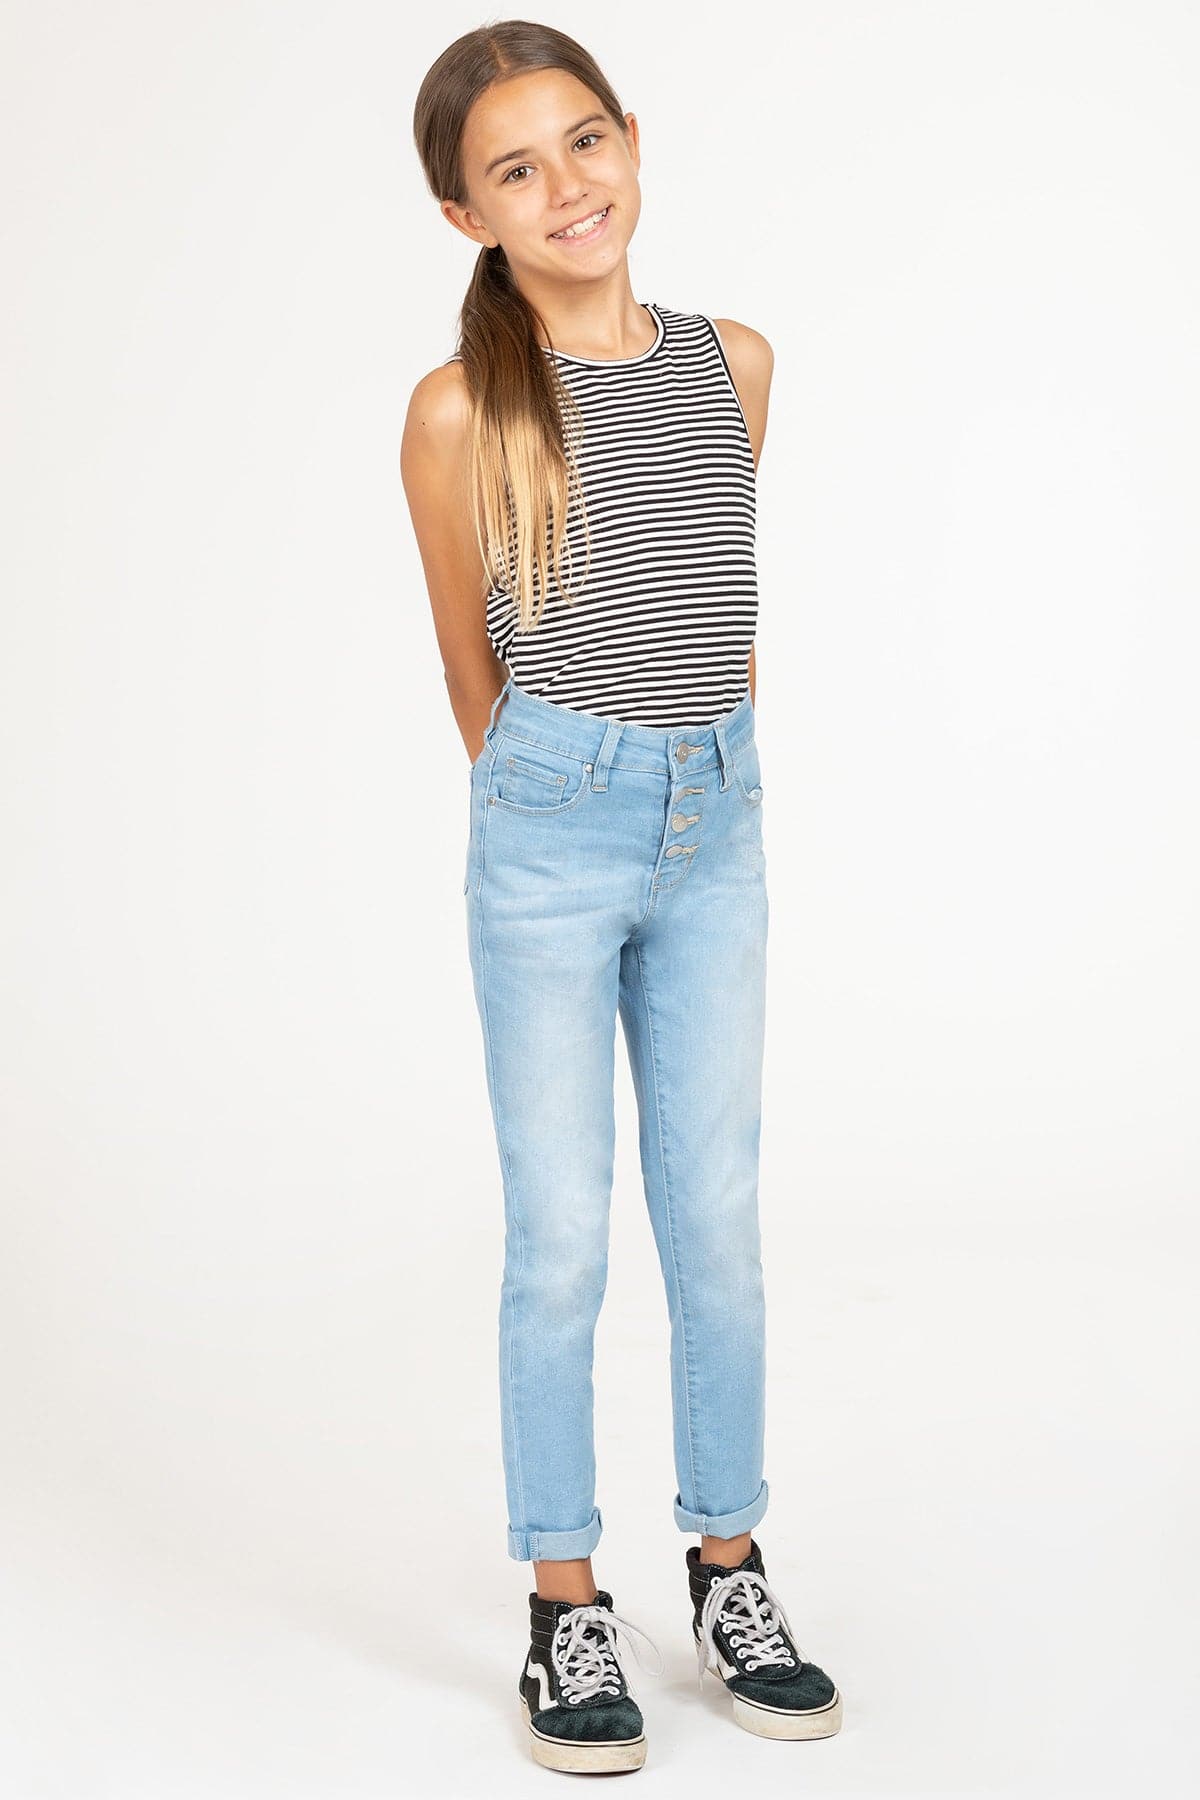 Girls High-Waisted Button-Fly Denim Ankle Jean with Rolled Cuffs from YMI